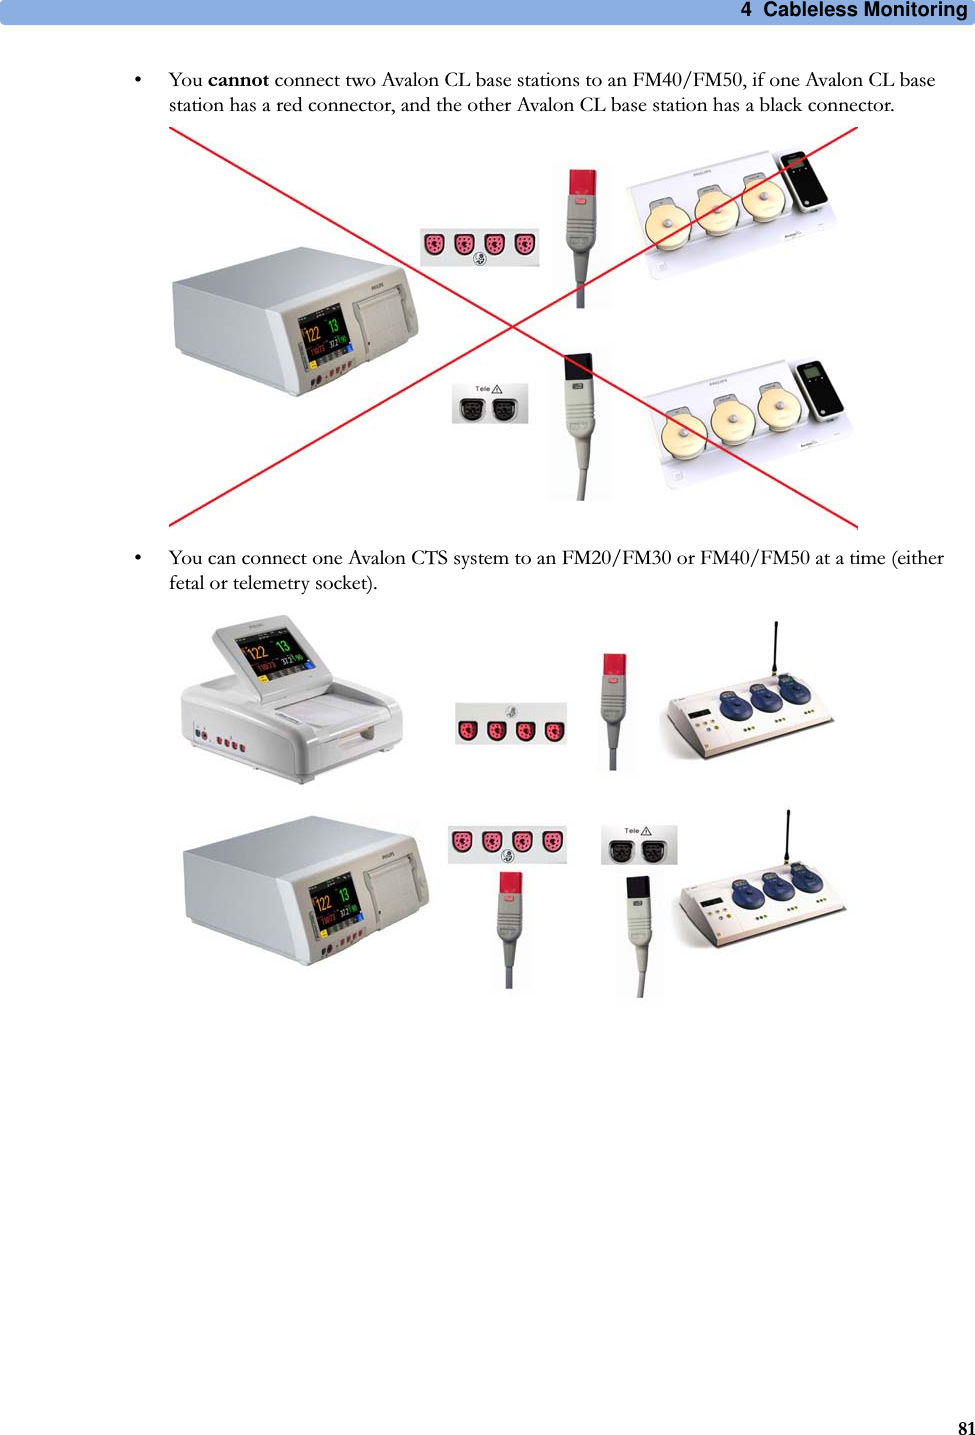 4  Cableless Monitoring81•You cannot connect two Avalon CL base stations to an FM40/FM50, if one Avalon CL base station has a red connector, and the other Avalon CL base station has a black connector.• You can connect one Avalon CTS system to an FM20/FM30 or FM40/FM50 at a time (either fetal or telemetry socket).